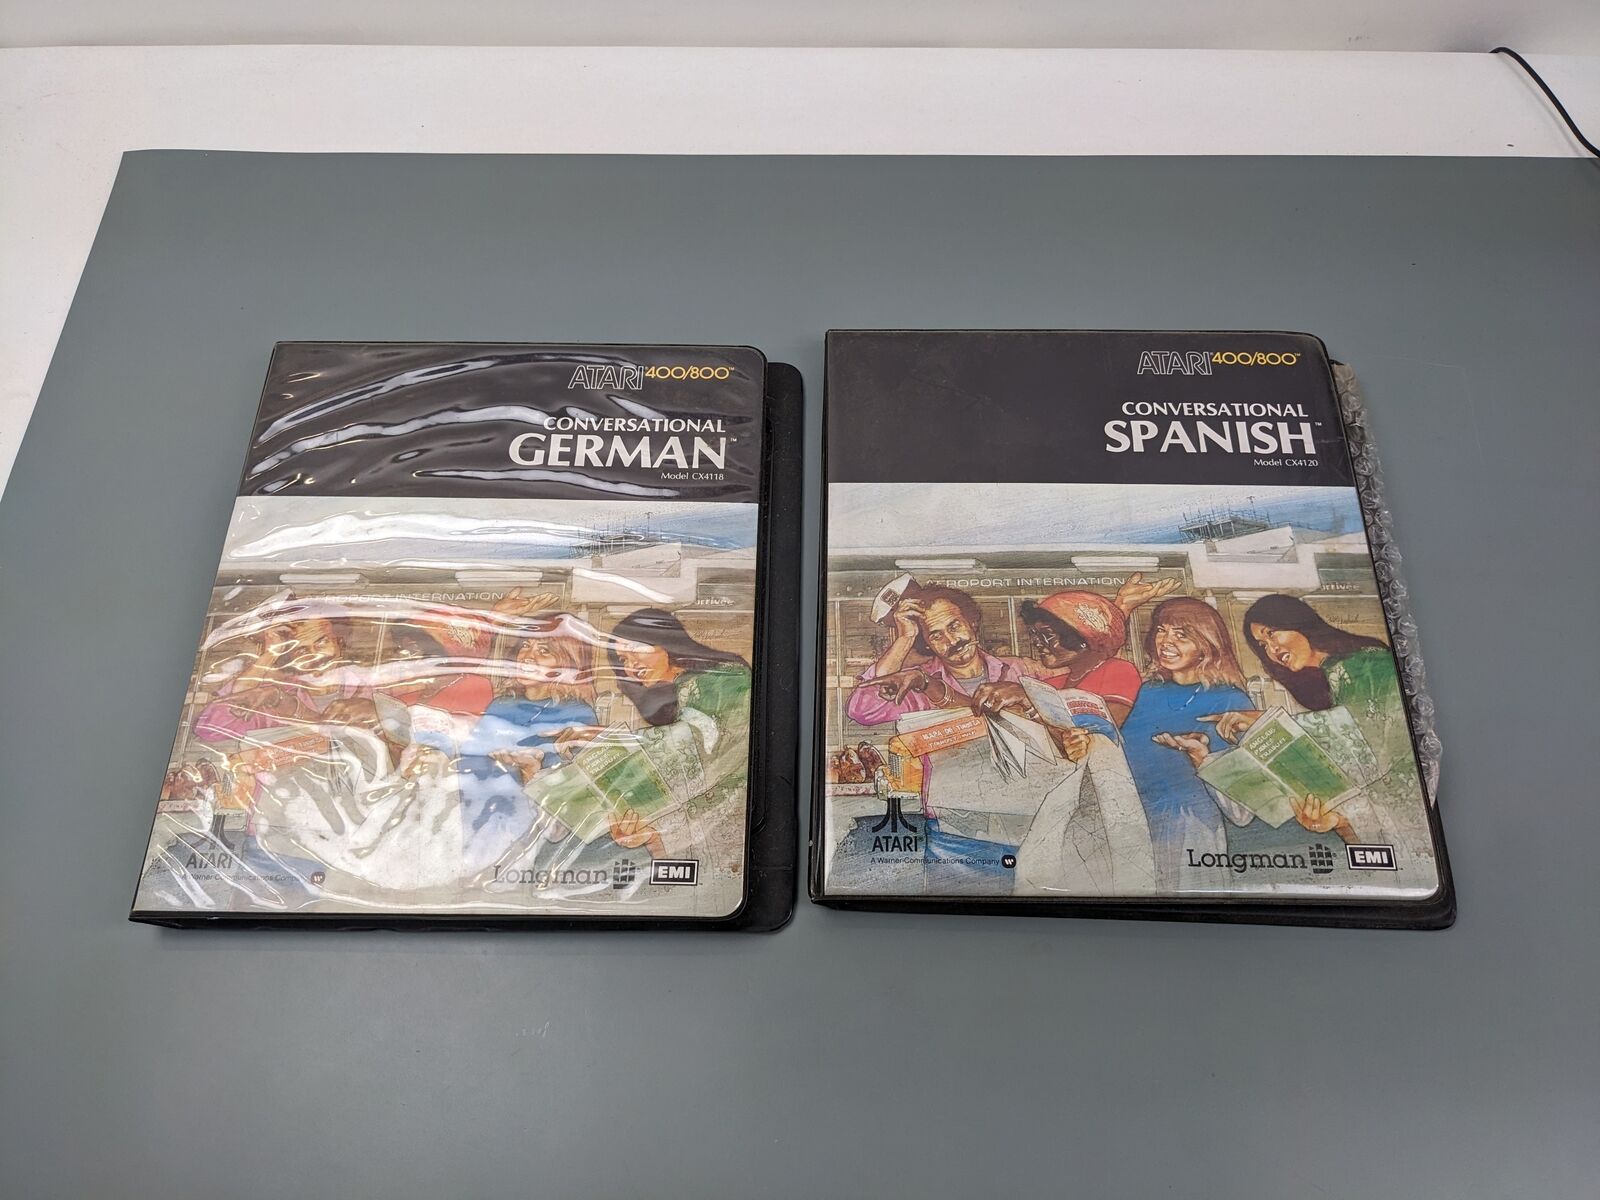 Atari 400/800 Conversational German + Spanish Tapes, Incomplete UNTESTED AS-IS